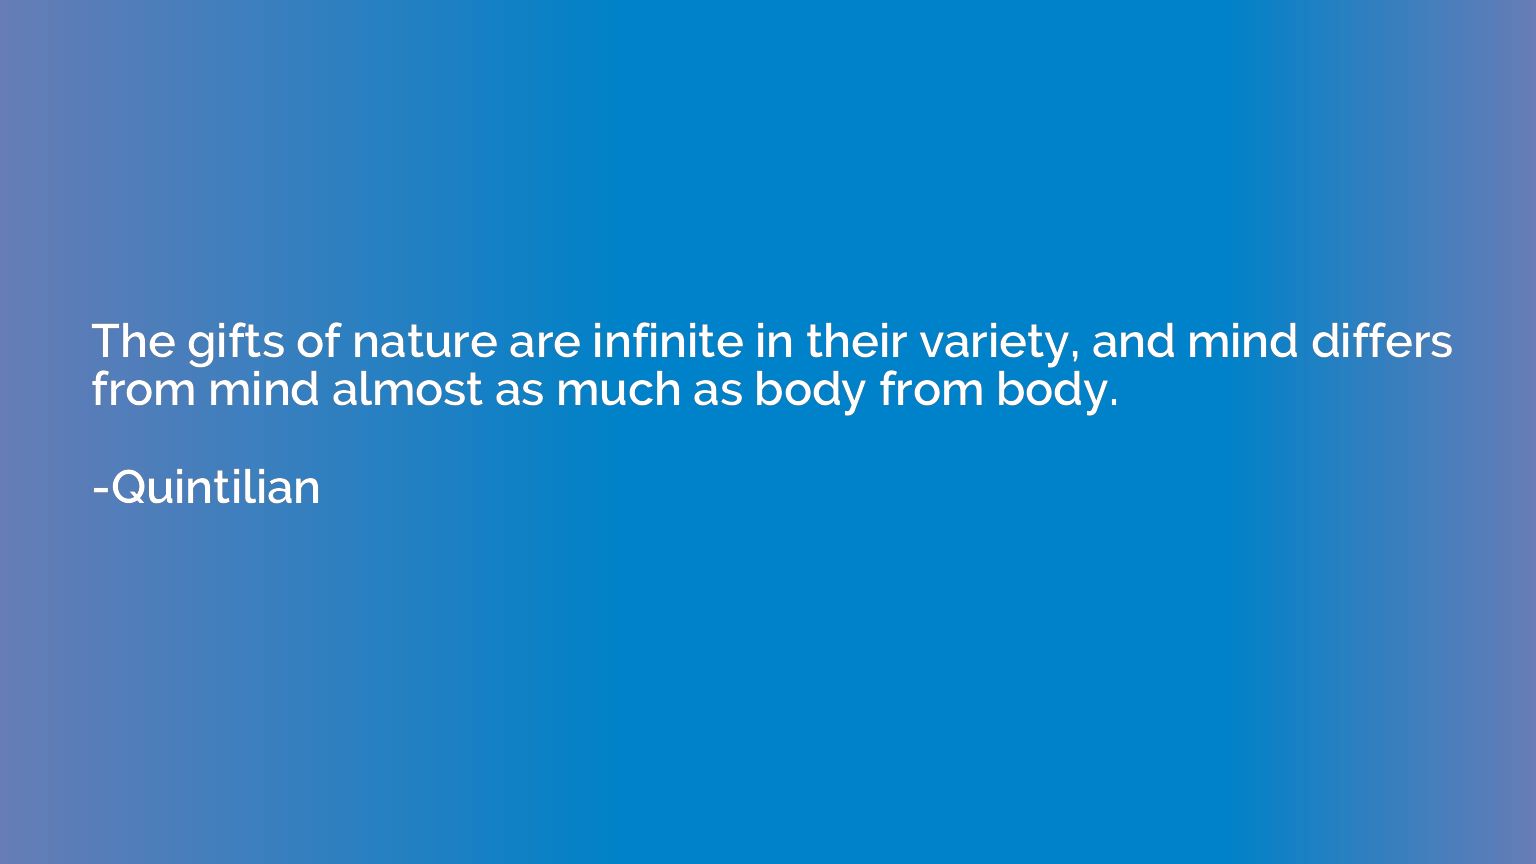 The gifts of nature are infinite in their variety, and mind 